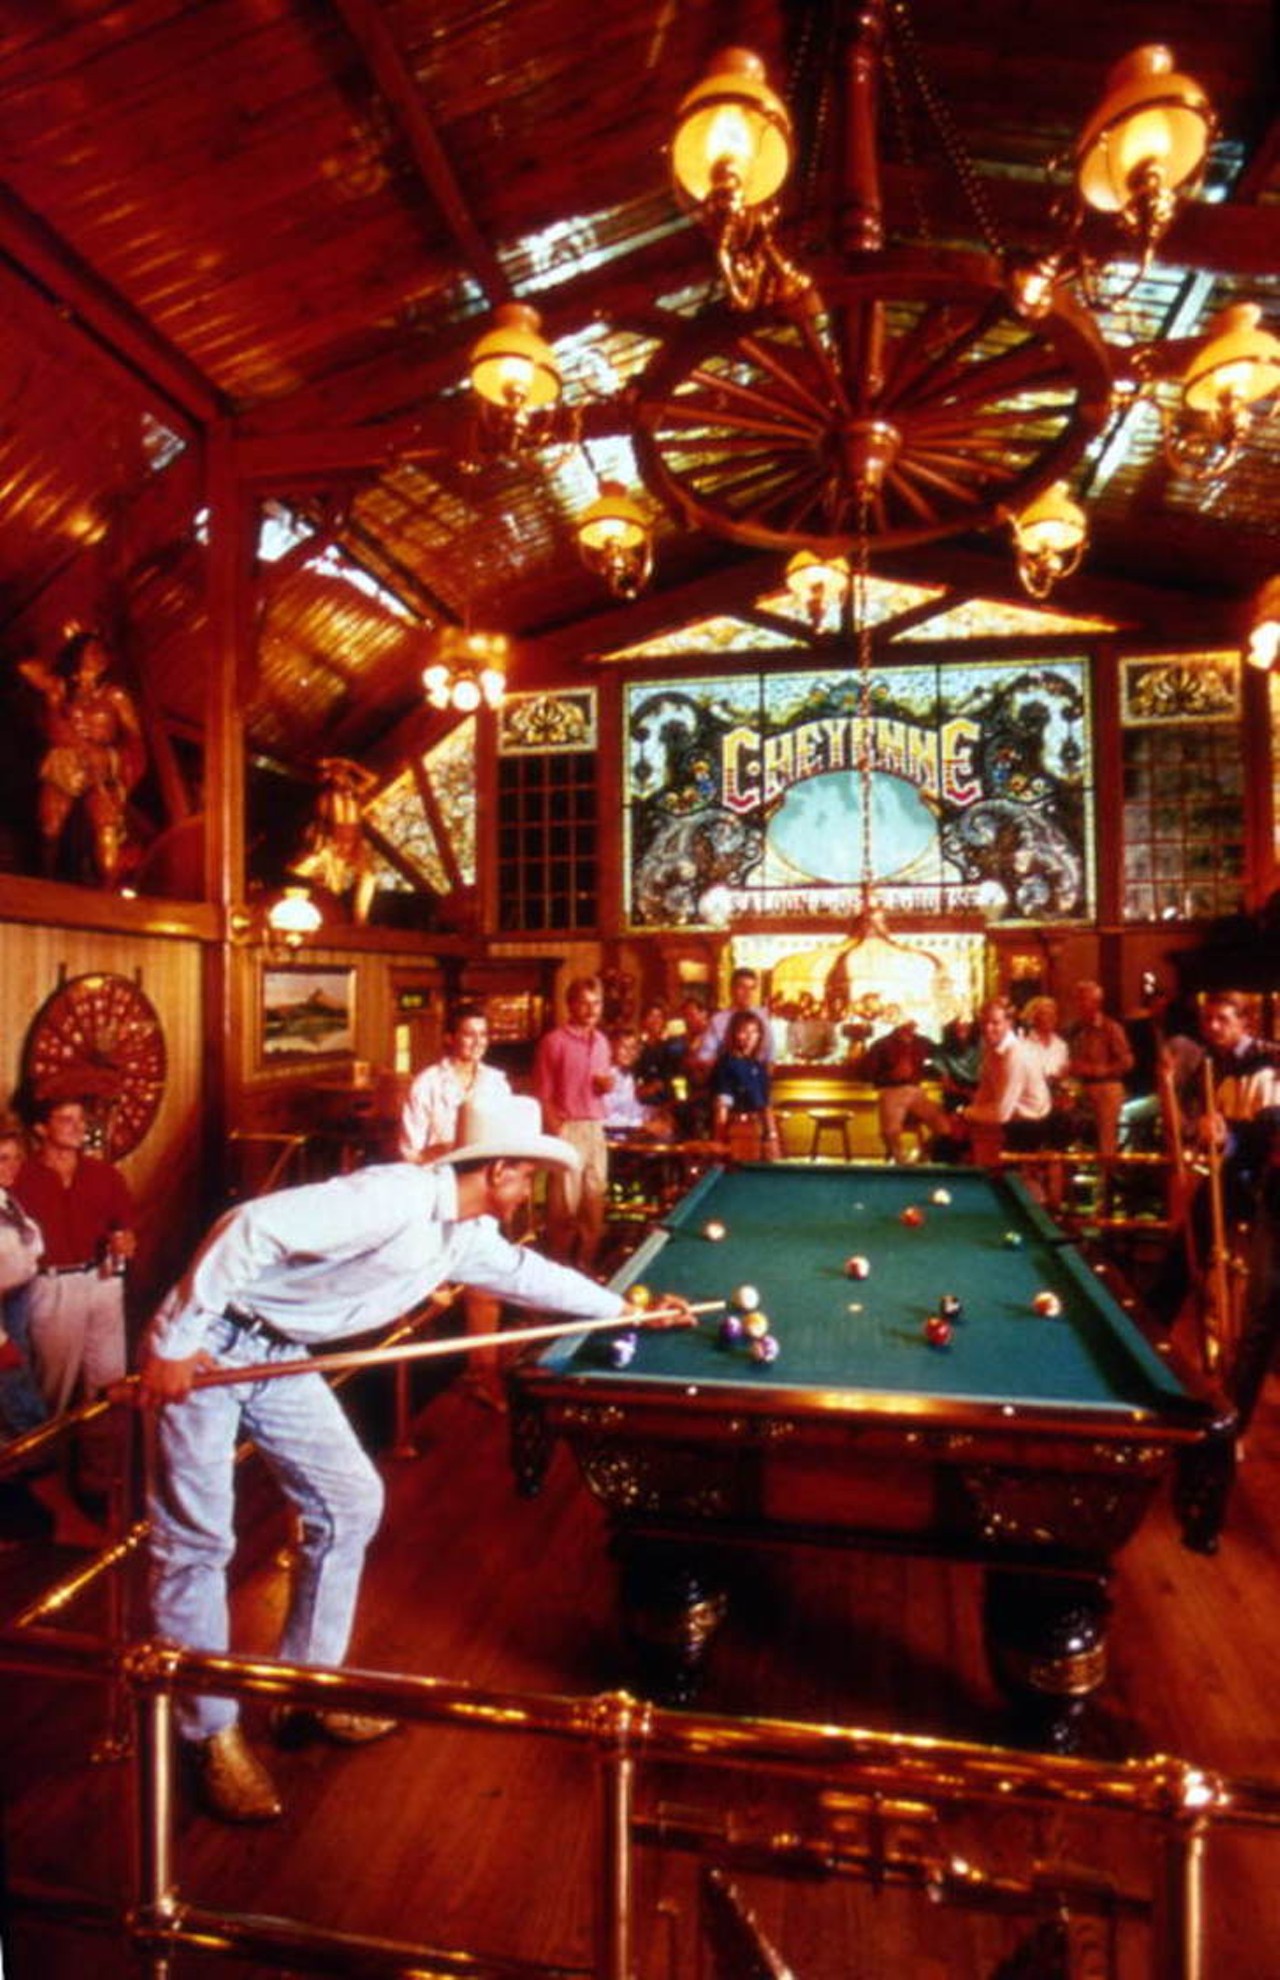 Tourists shooting pool at the Cheyenne Saloon and Opera House in Church Street Station, likely after 1972.